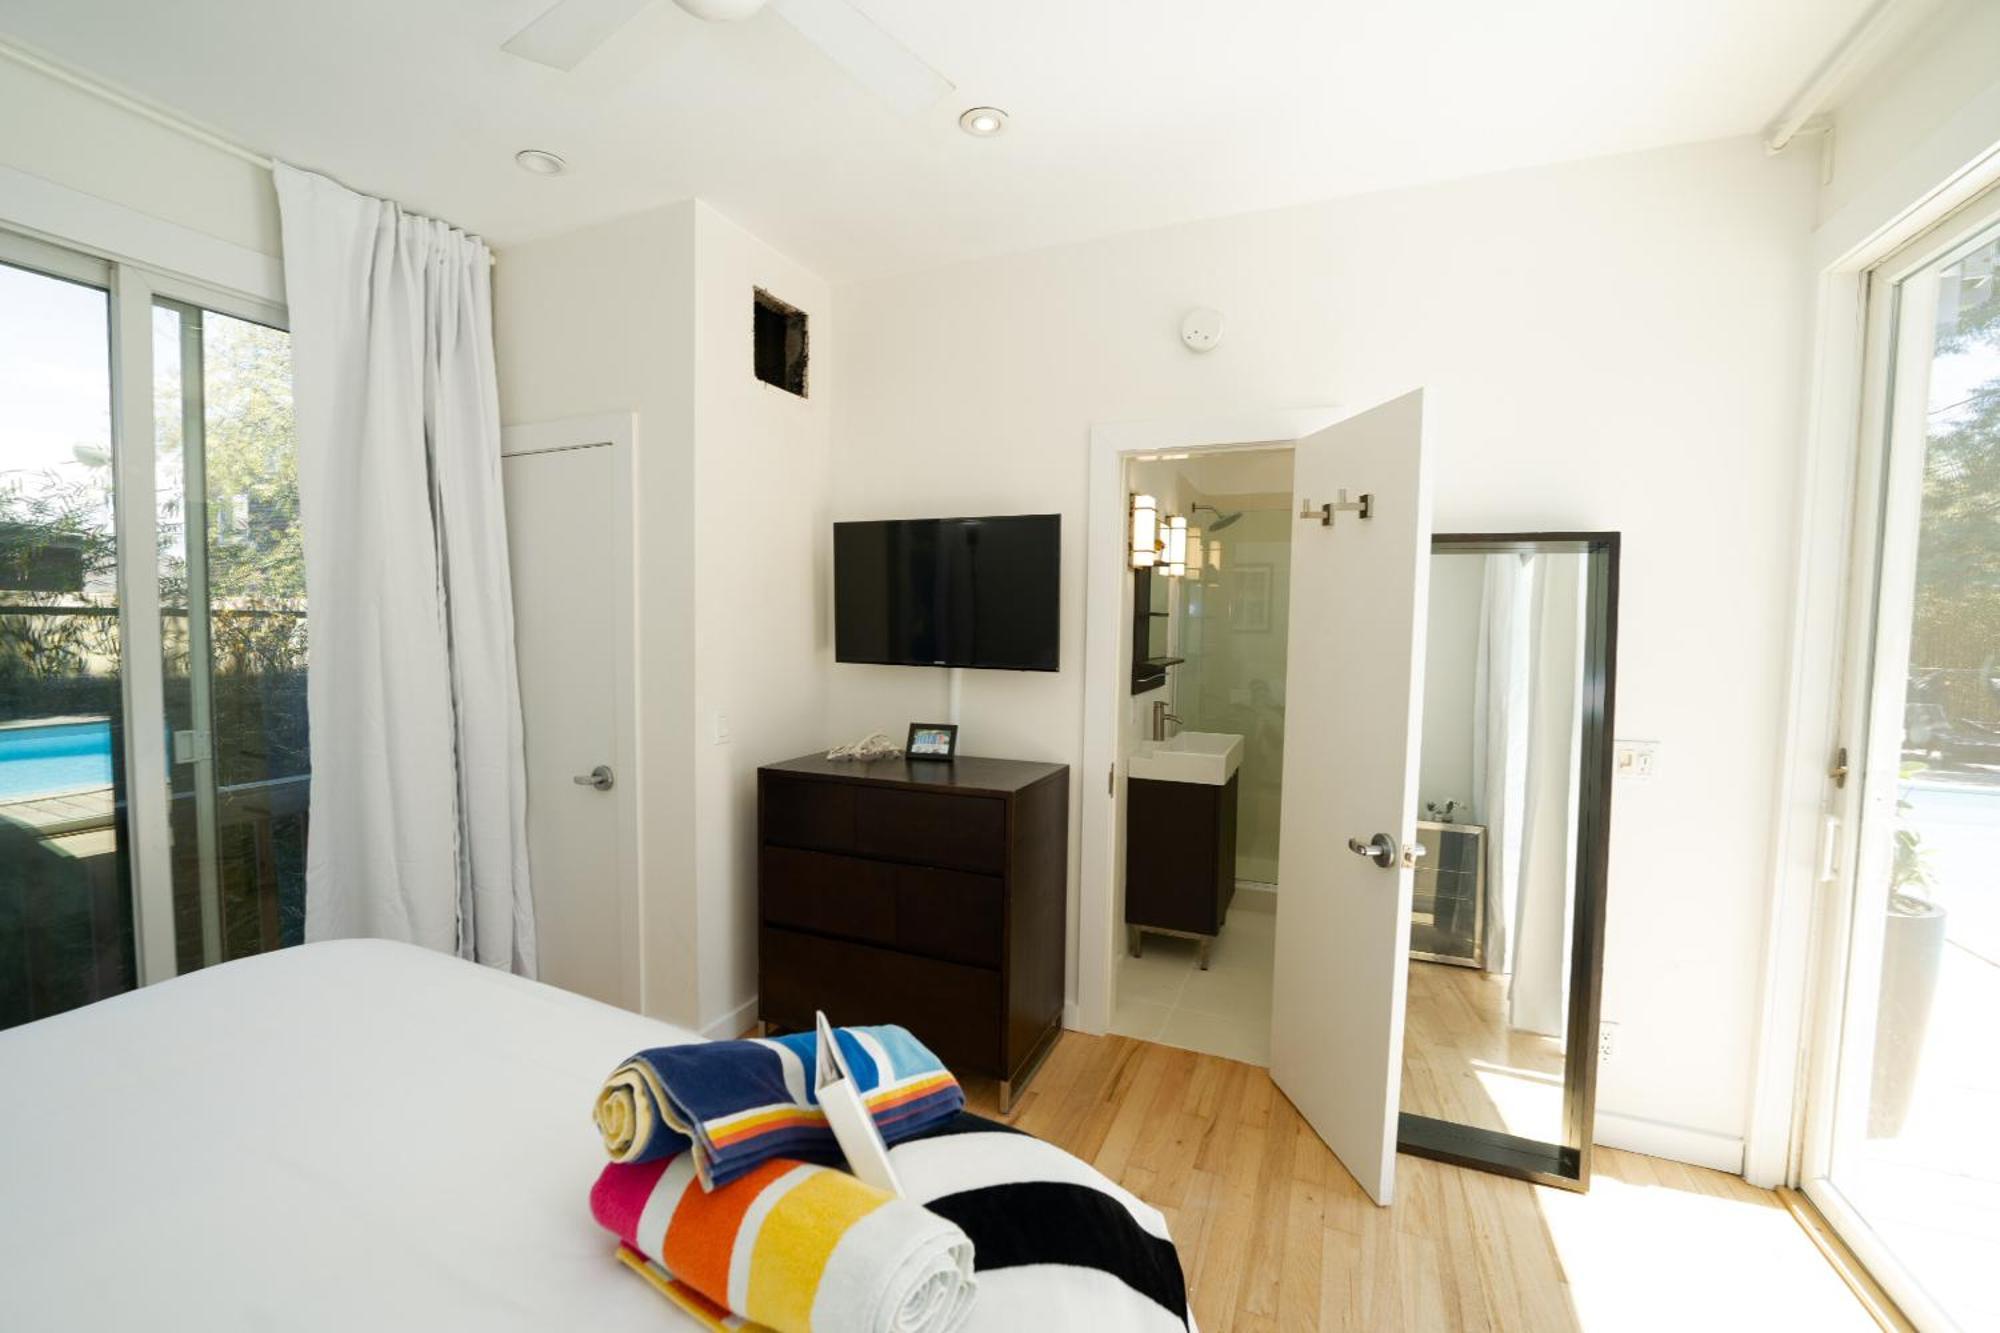 The Madison Fire Island Pines Hotel Room photo